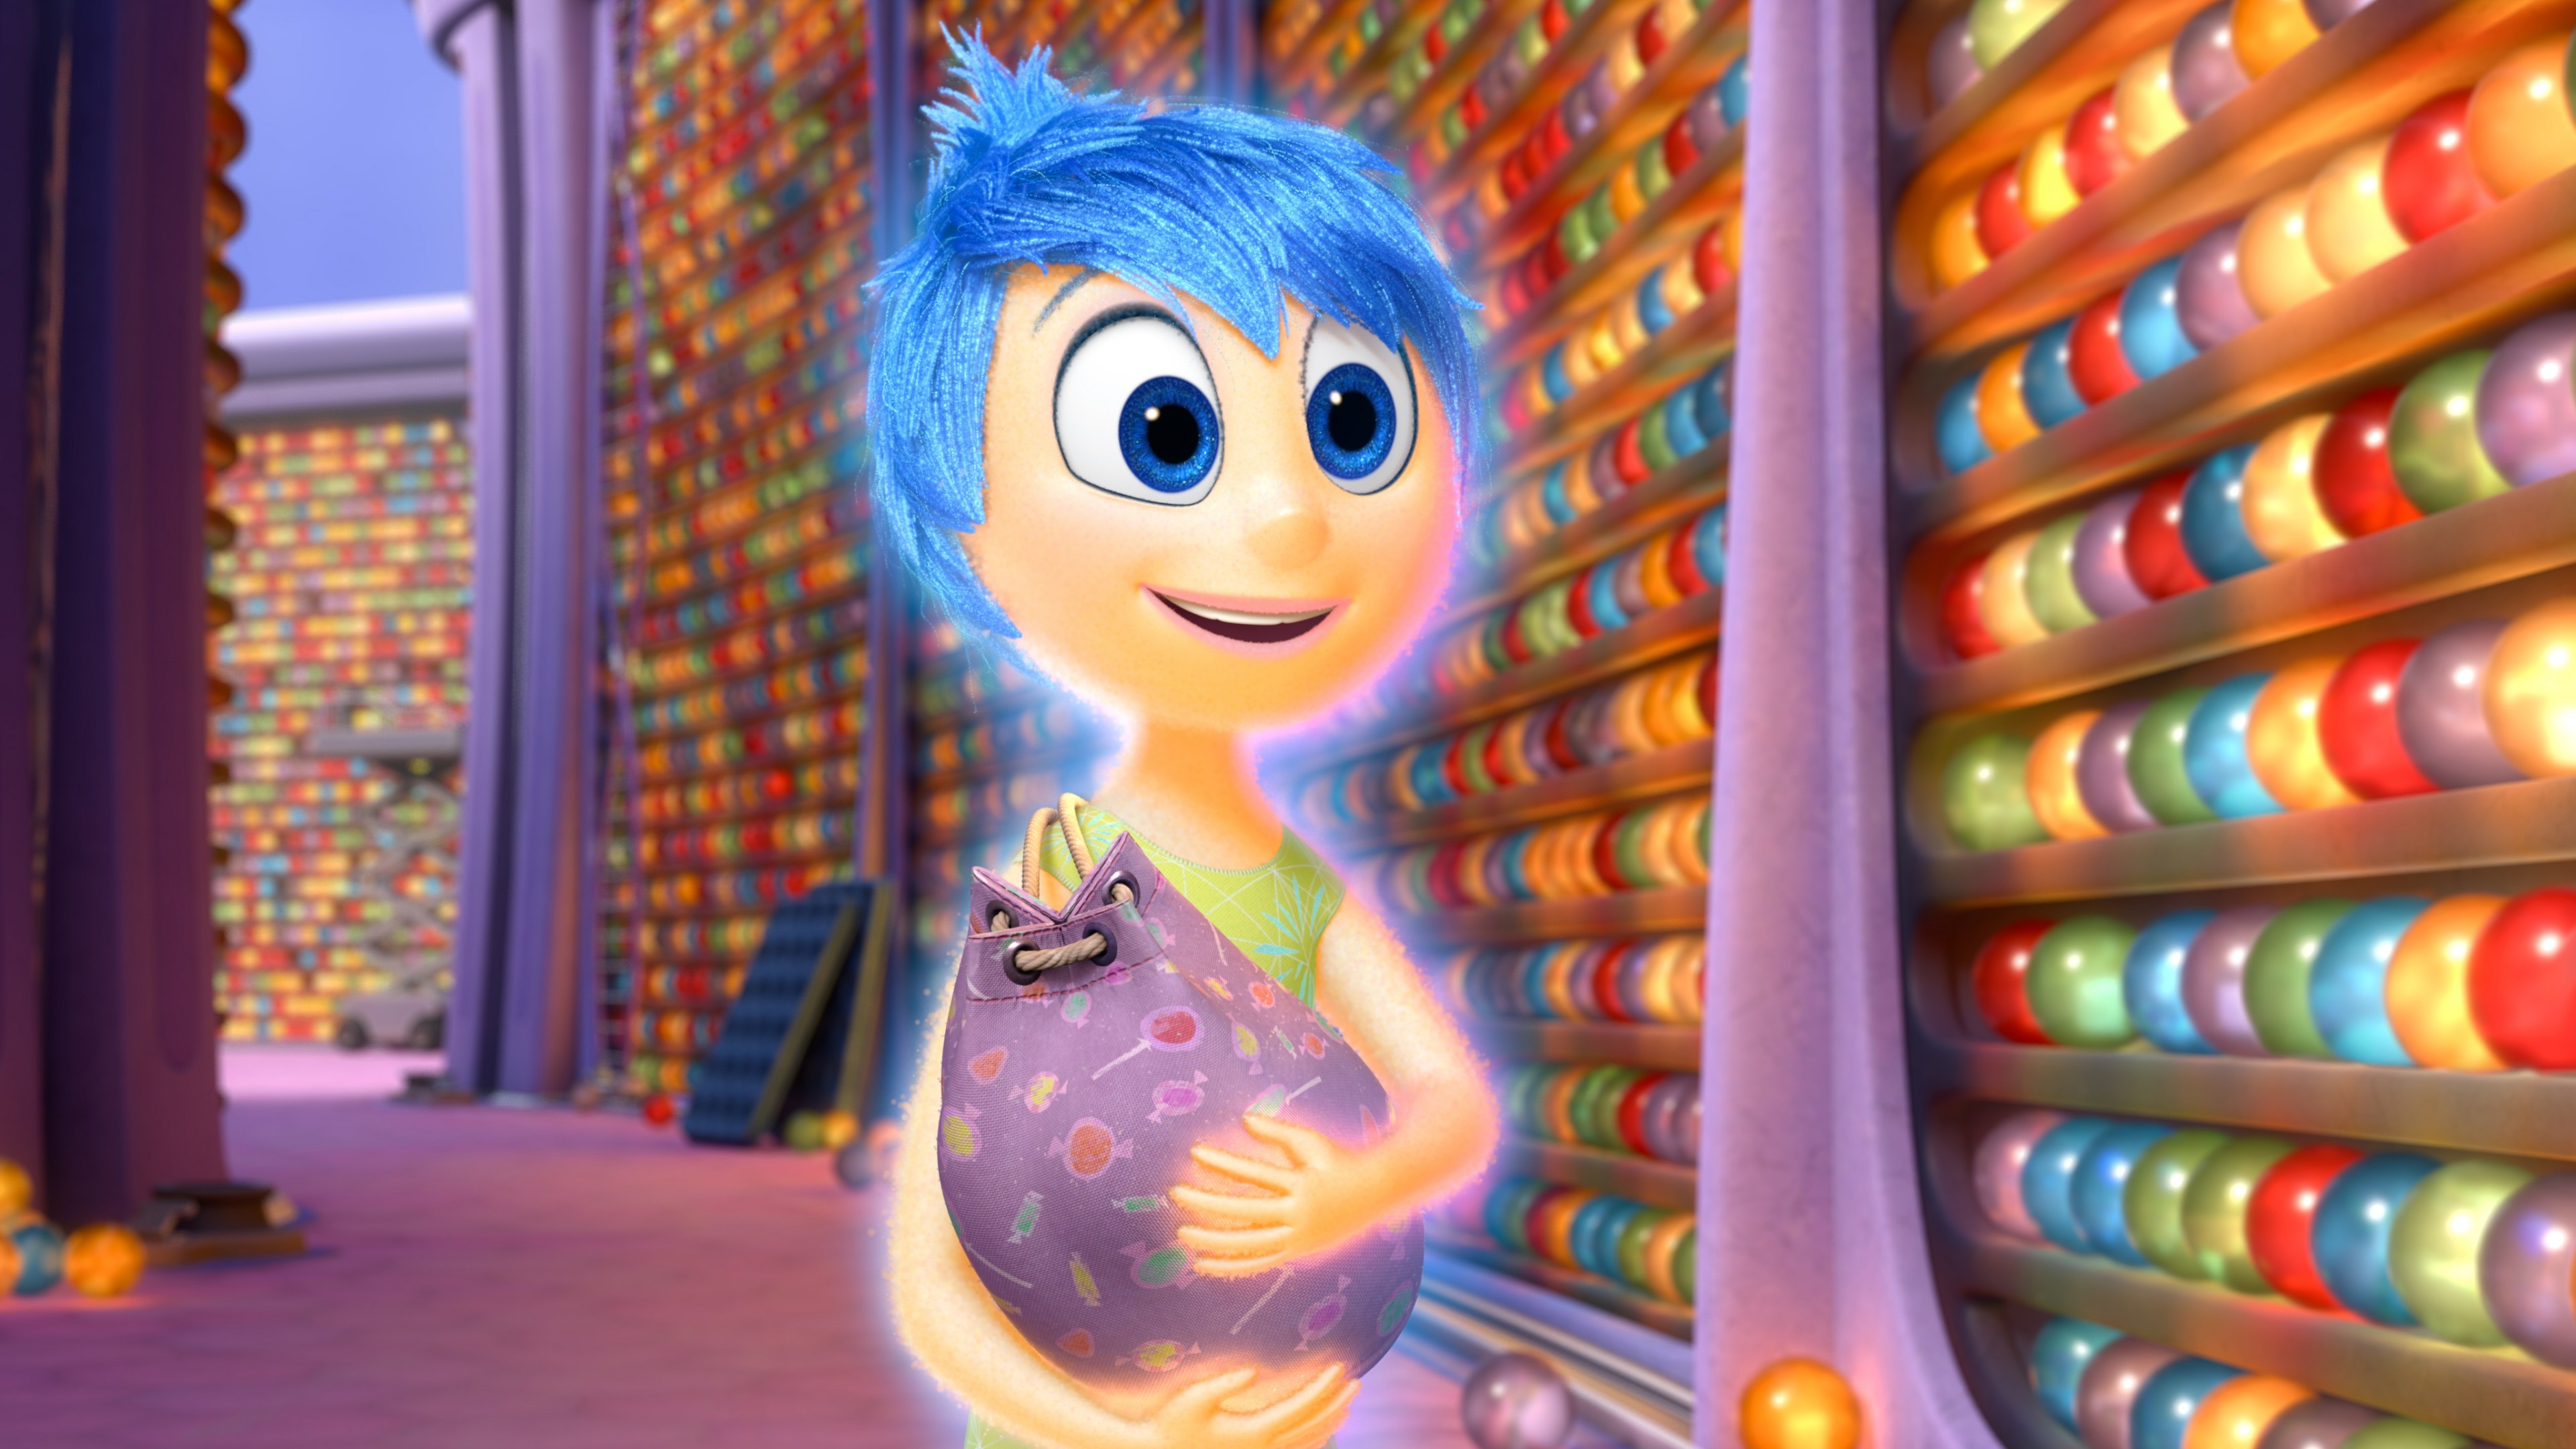 Wallpaper Inside out, best movies of 2015, cartoon, Movies #4813 3840x2160